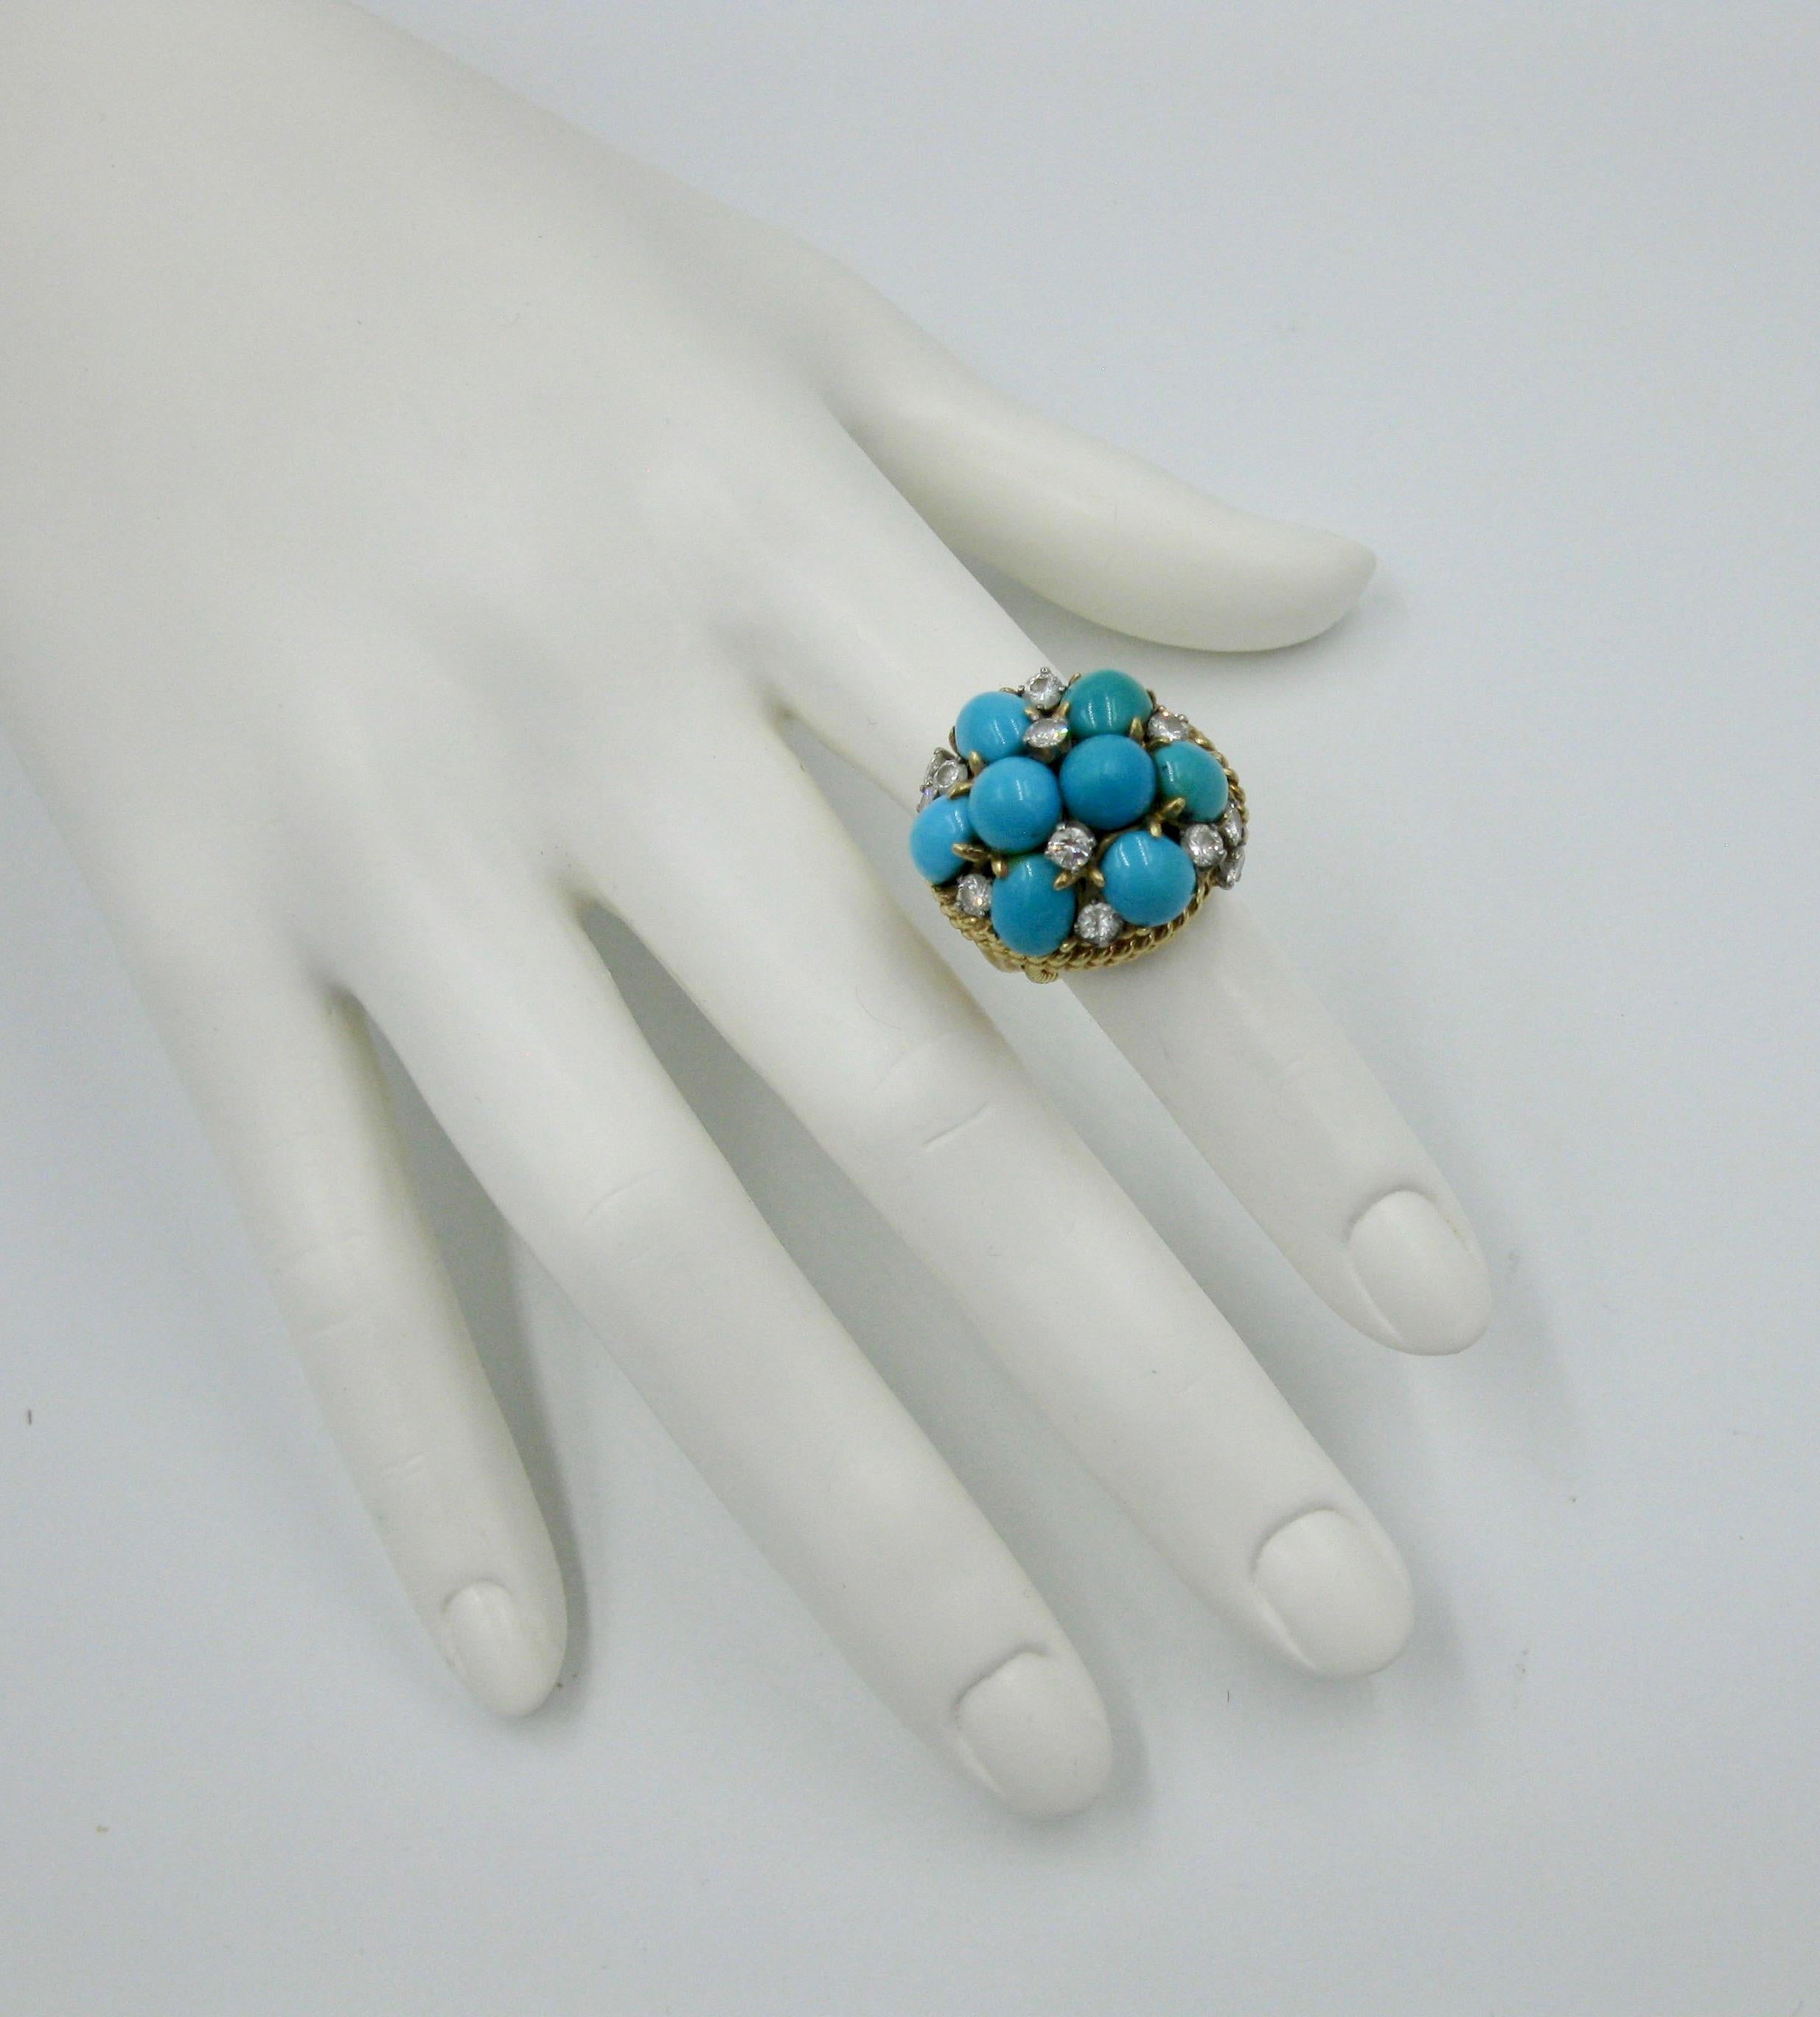 This is a magnificent Persian Turquoise Diamond Ring.  The jewel is set with eight gorgeous Persian Turquoise oval and round cabochons of great beauty.  The ring is further set with 12 sparkling white Diamonds scattered throughout the blue of the